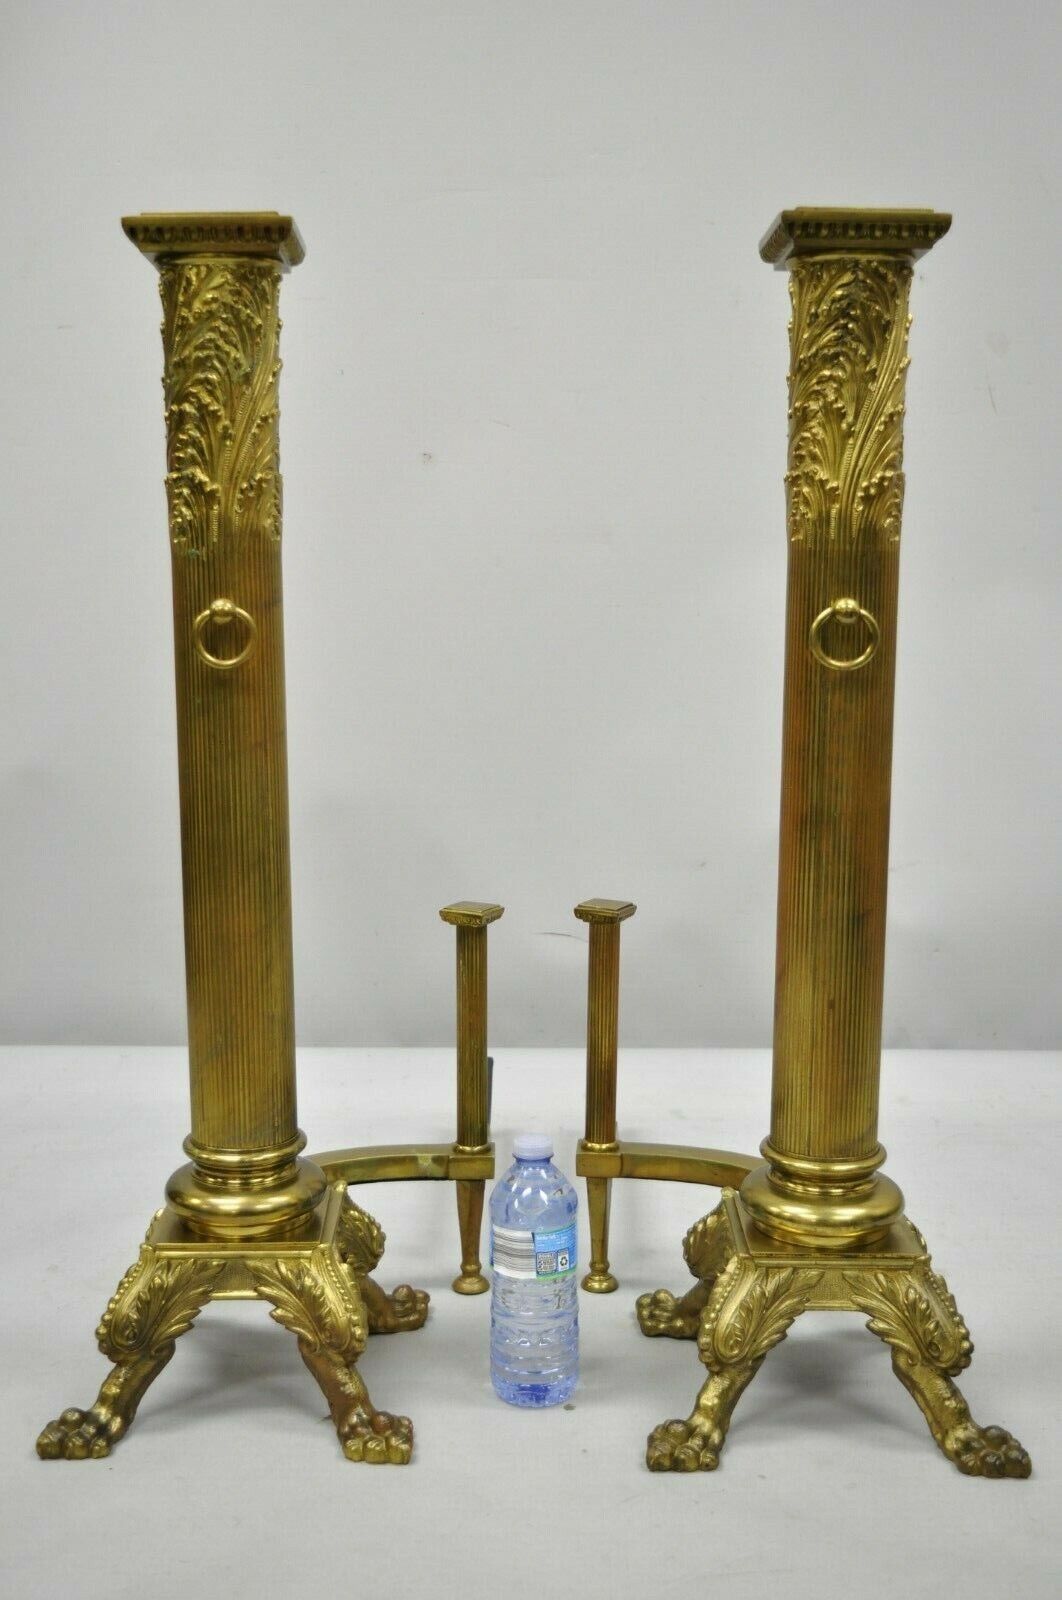 Large Pair 19th C. 32" Bronze French Empire Paw Foot Column Fireplace Andirons